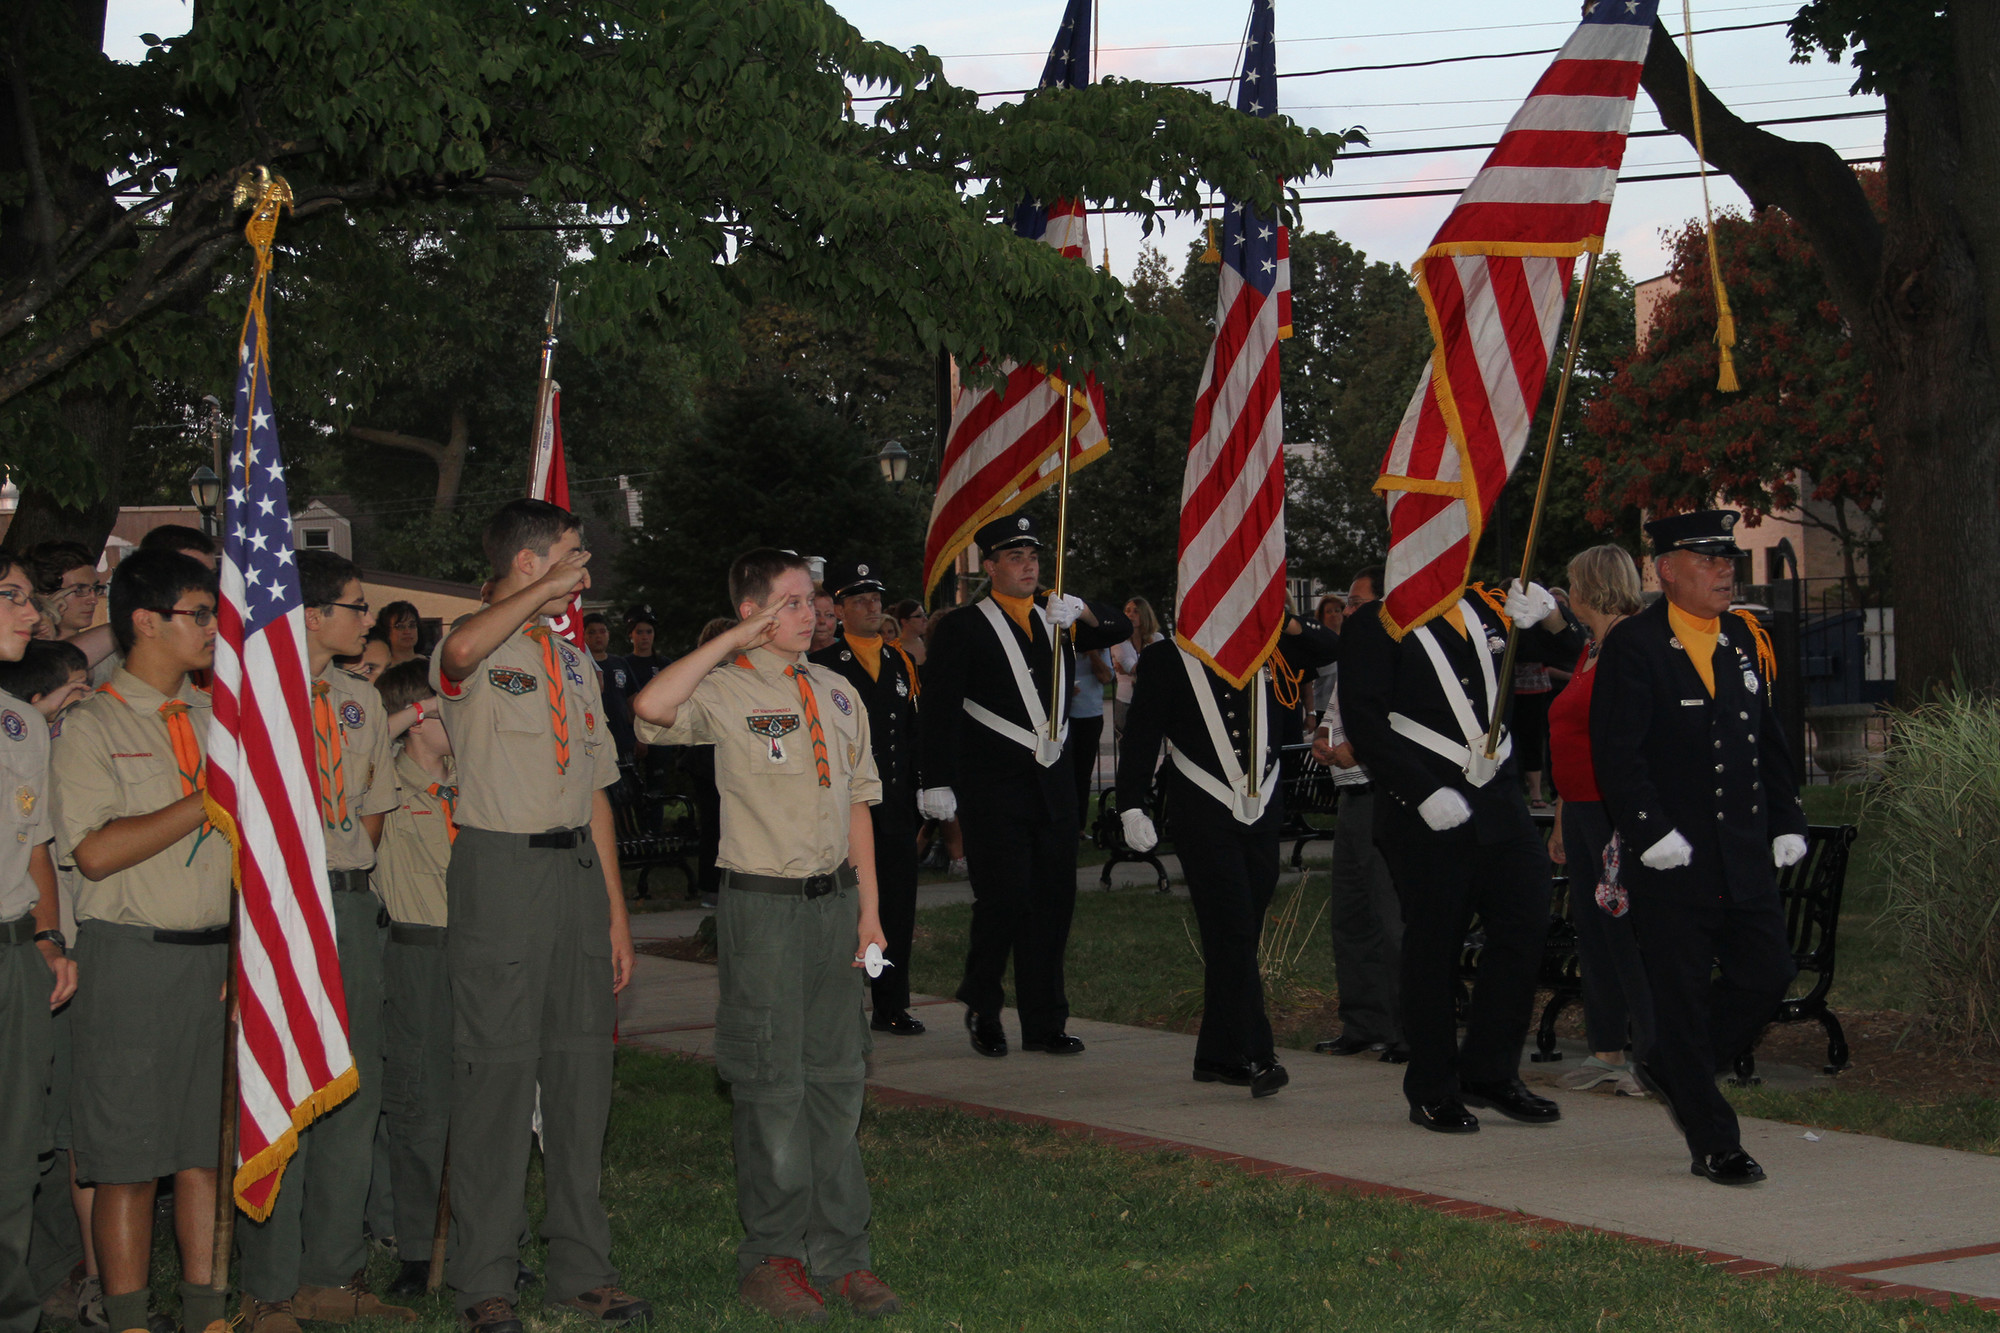 The annual ceremony brings local community groups and organizations together, like the East Meadow Fire Department, right, and Boy Scouts, at left.